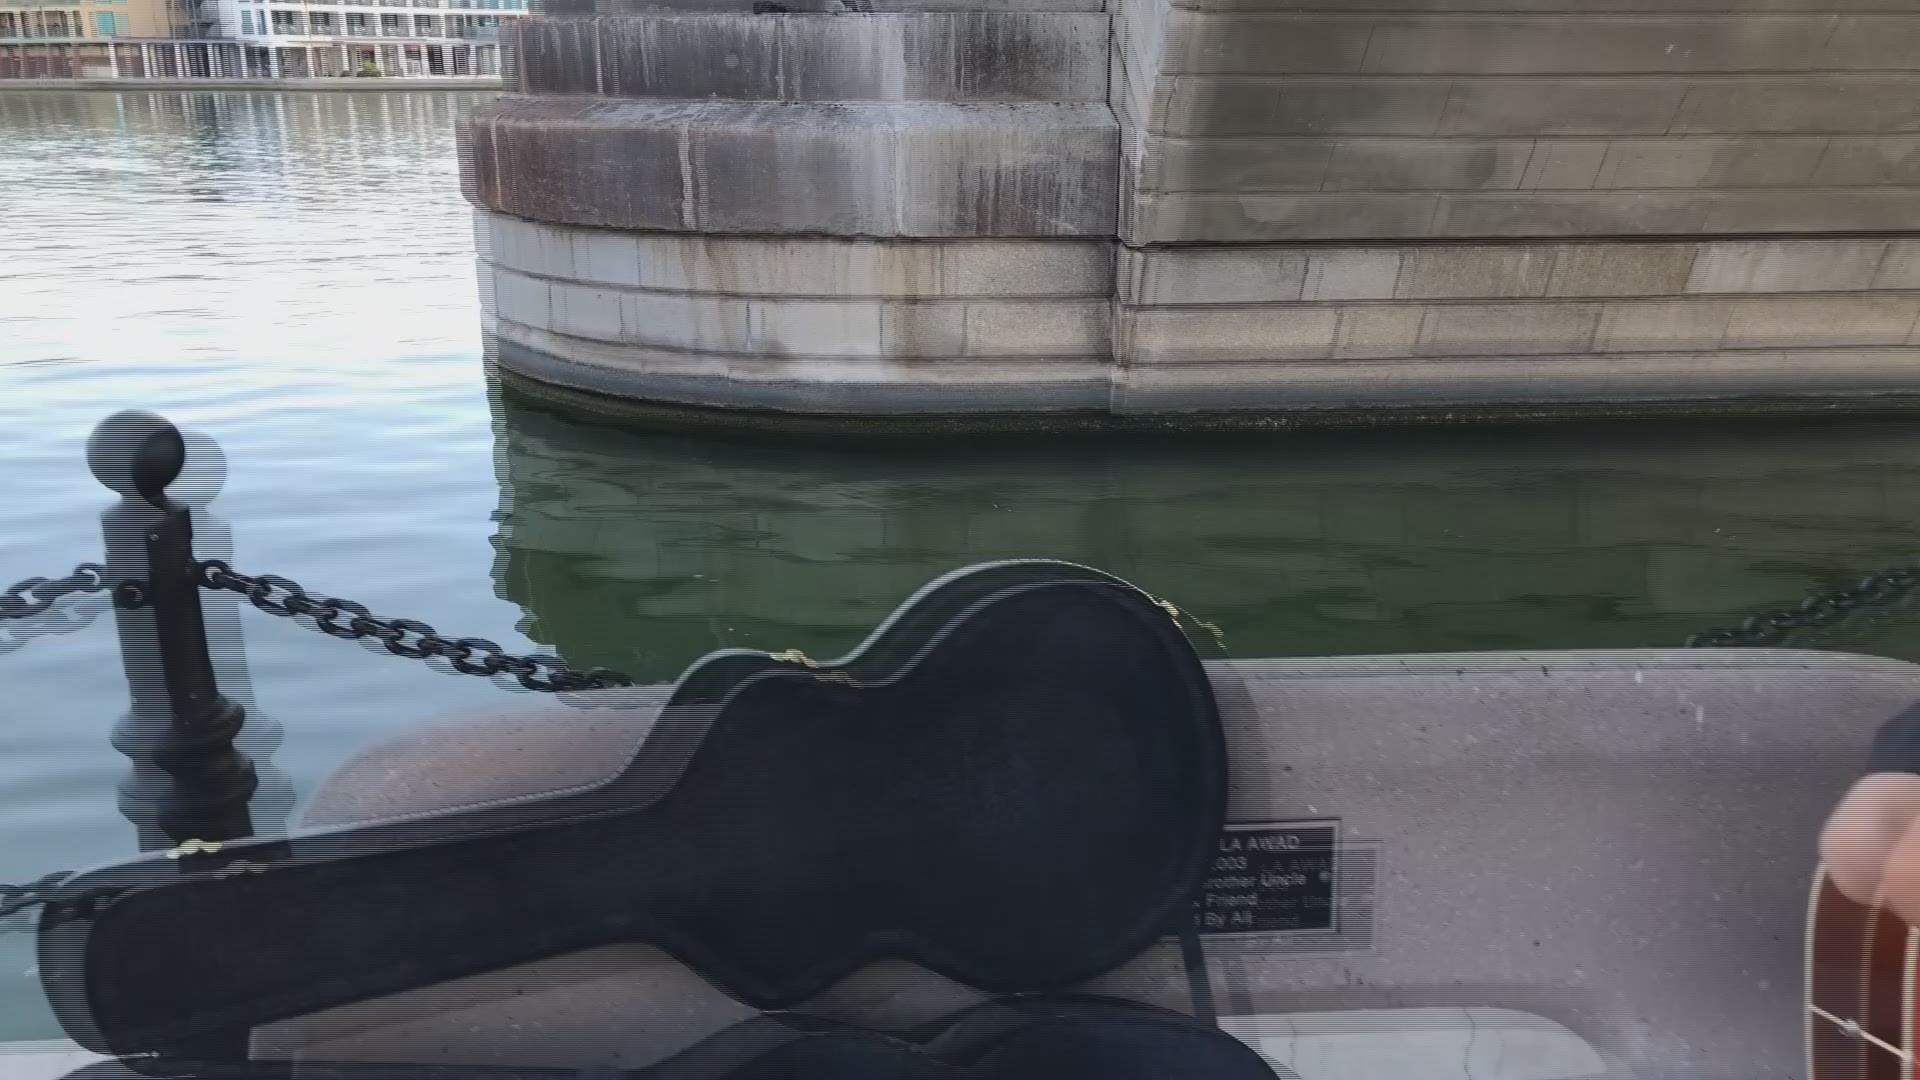 Listen to this Lake Havasu City man's original song. He sings and plays to entertain visitors at the London Bridge.